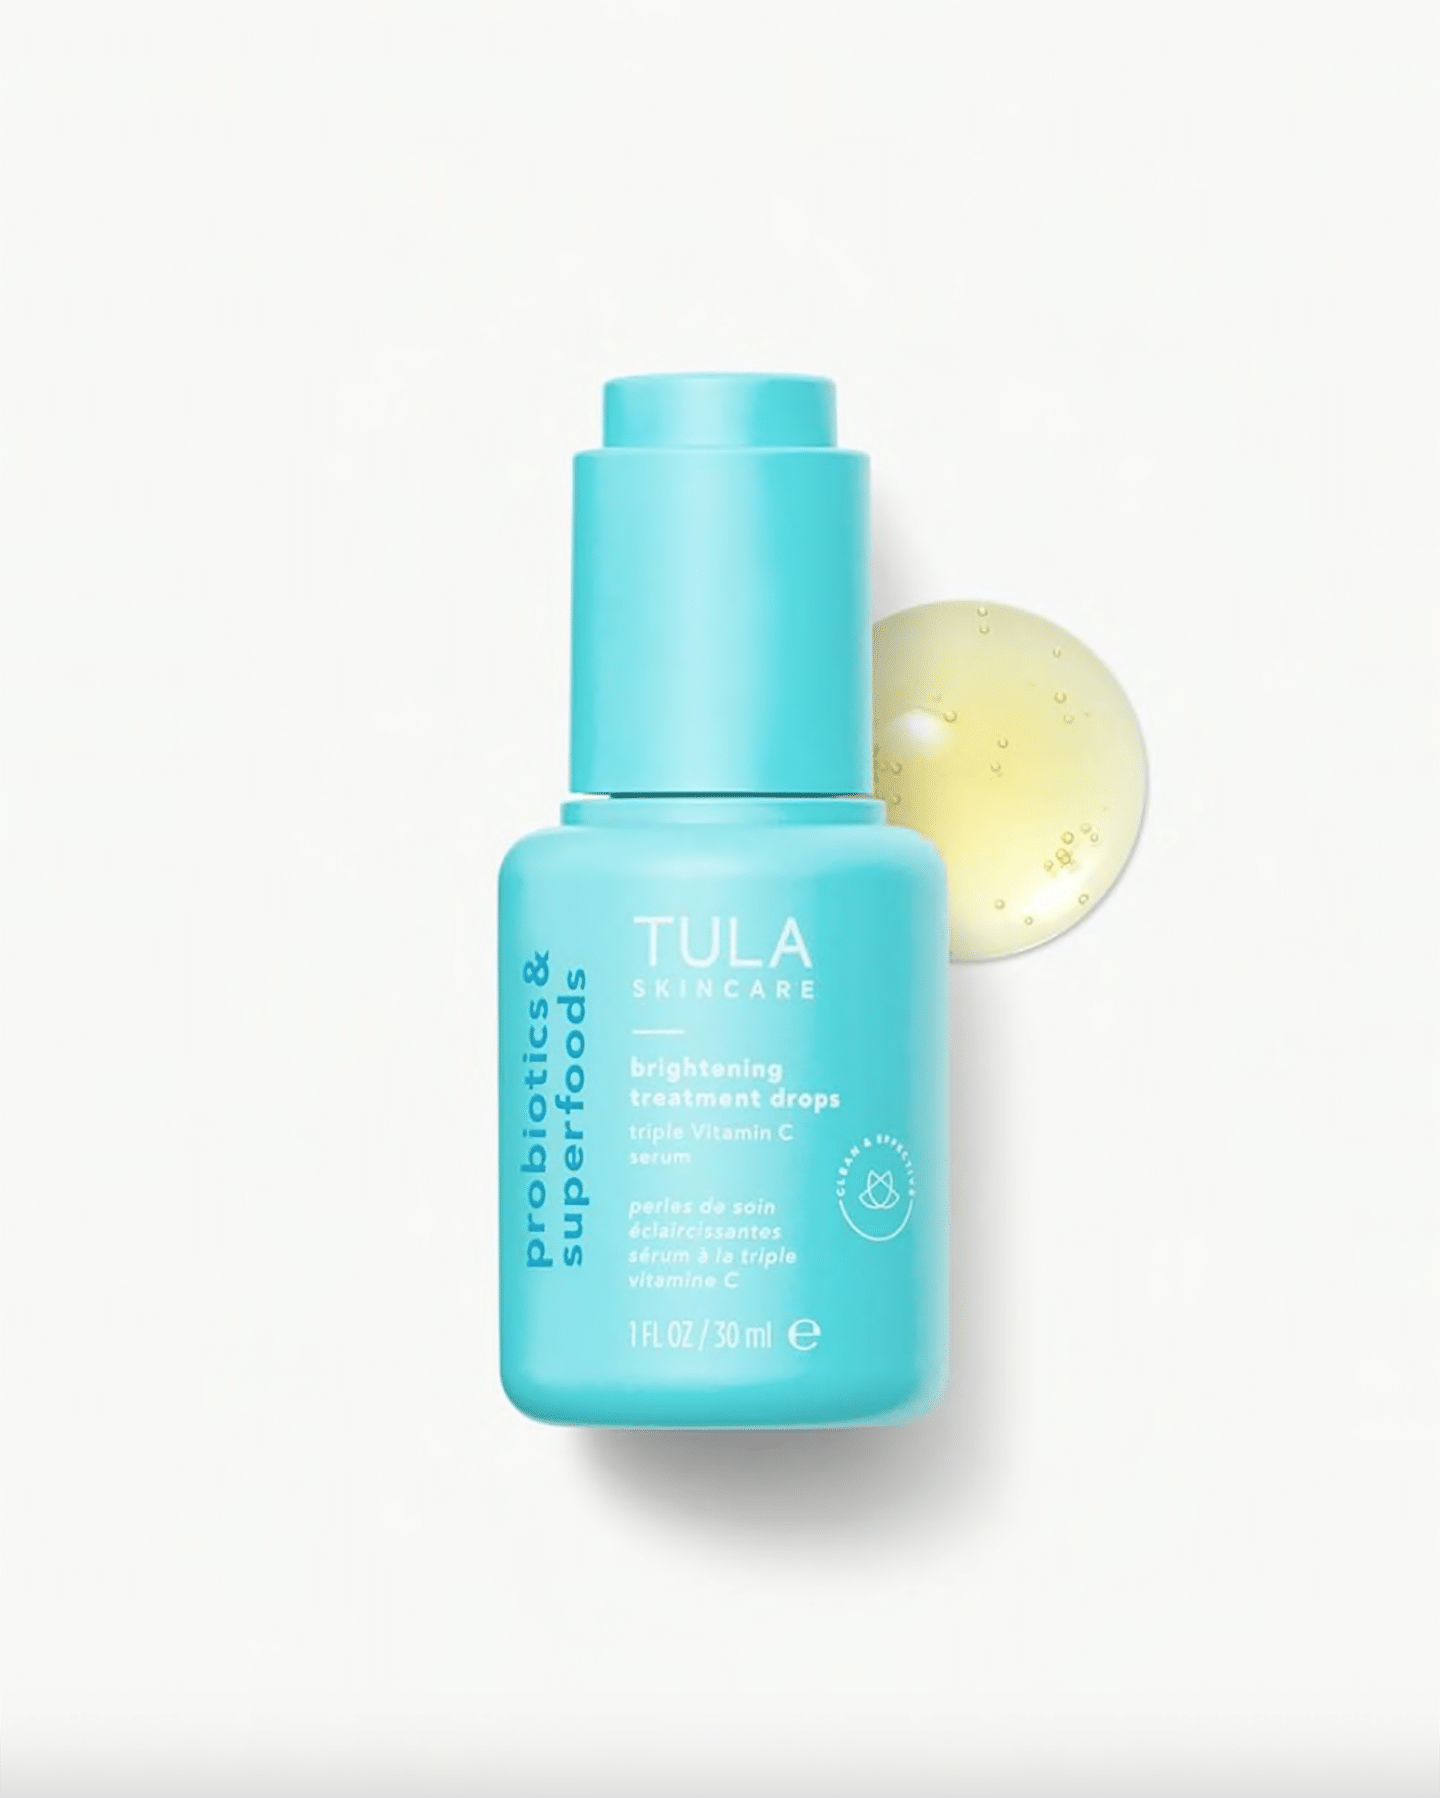 TULA skincare reviews, by beauty blogger What The Fab